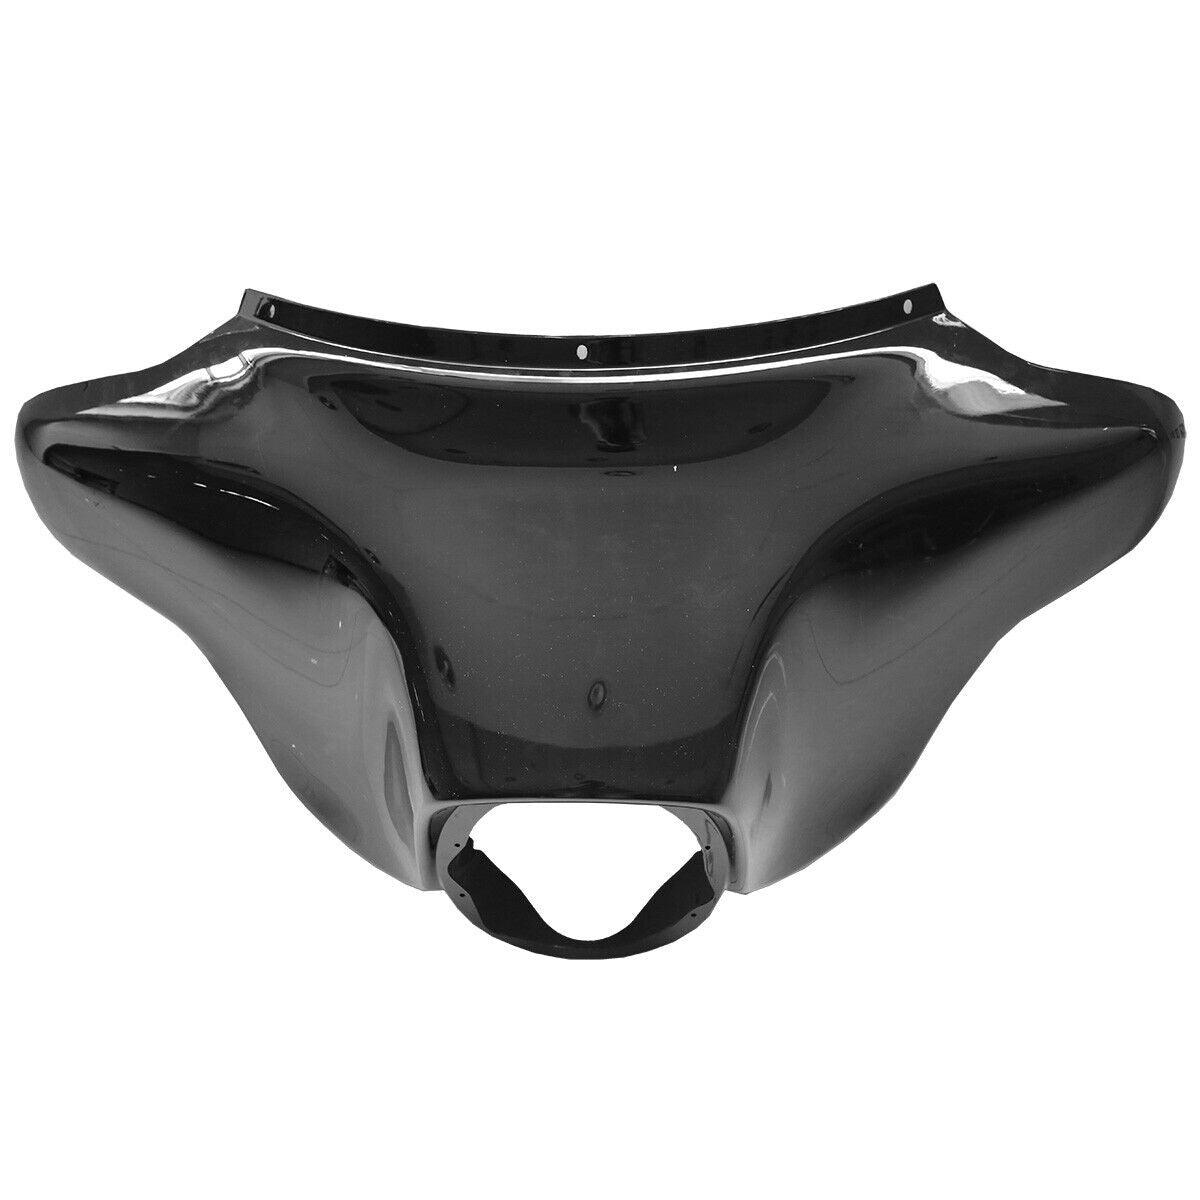 ABS Batwing Upper Outer Fairing Fit For Harley Electra Street Glide 96-13 Black - Moto Life Products